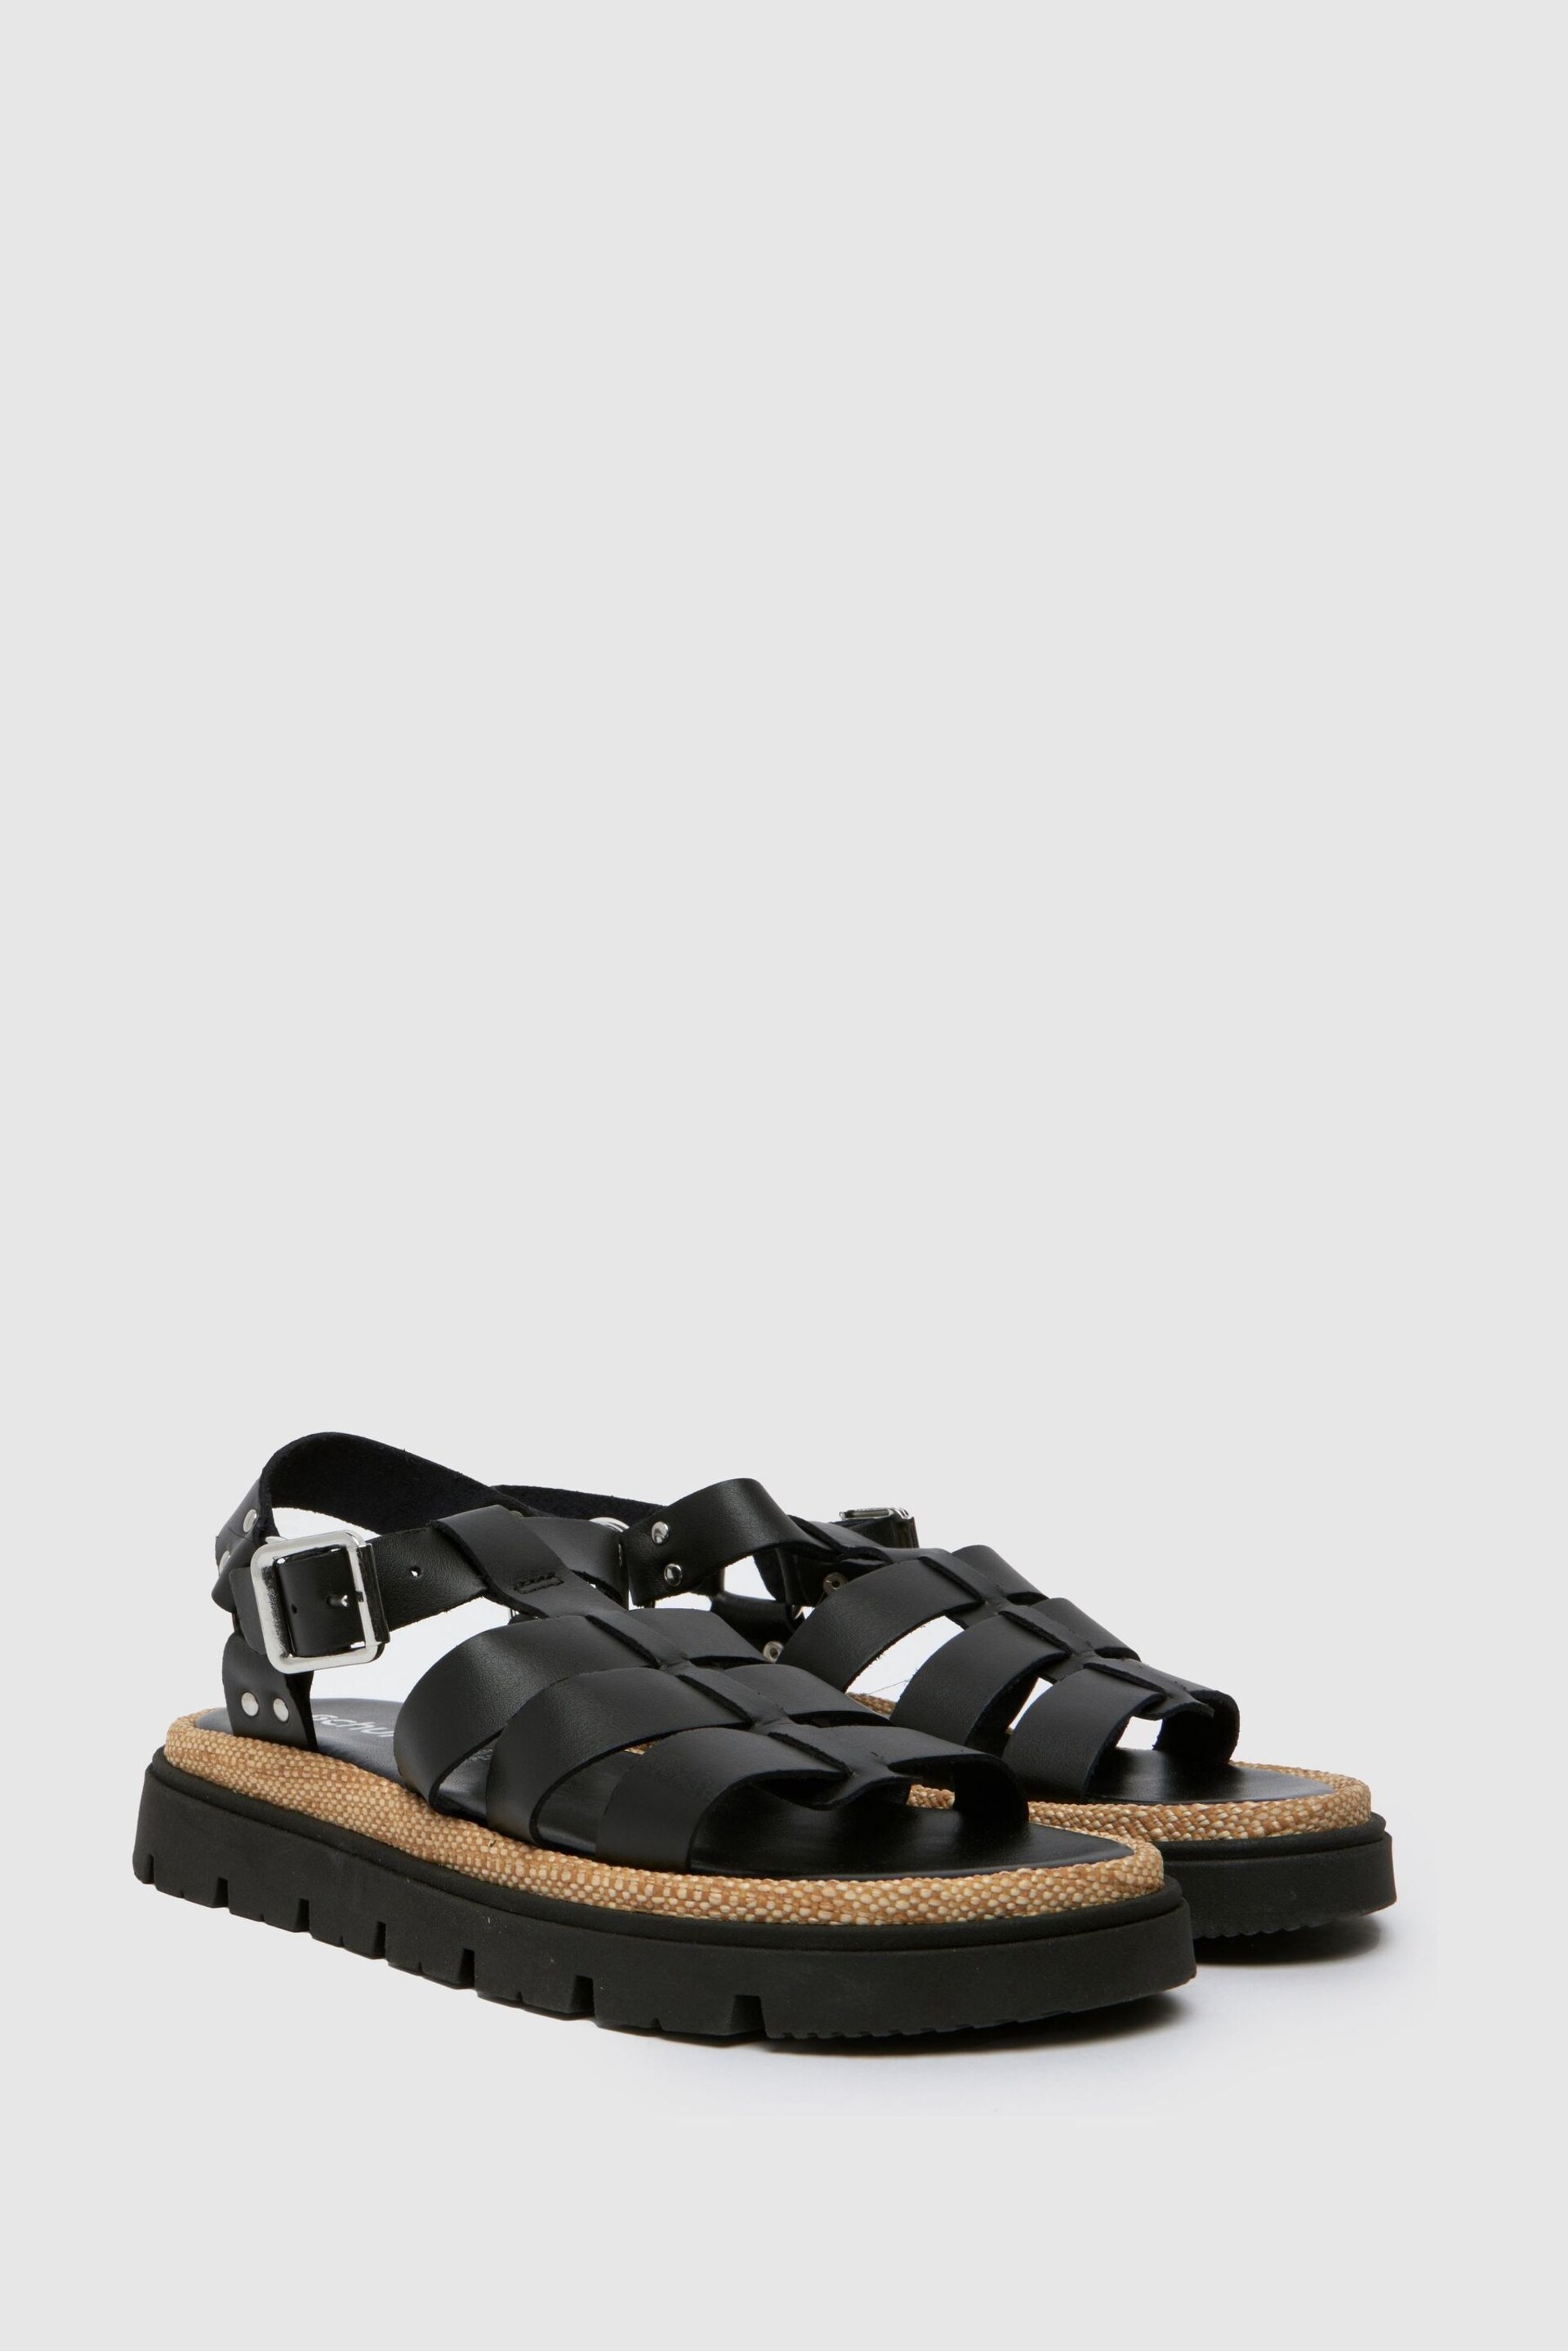 Schuh Texas Leather Gladiator Black Sandals - Image 2 of 4